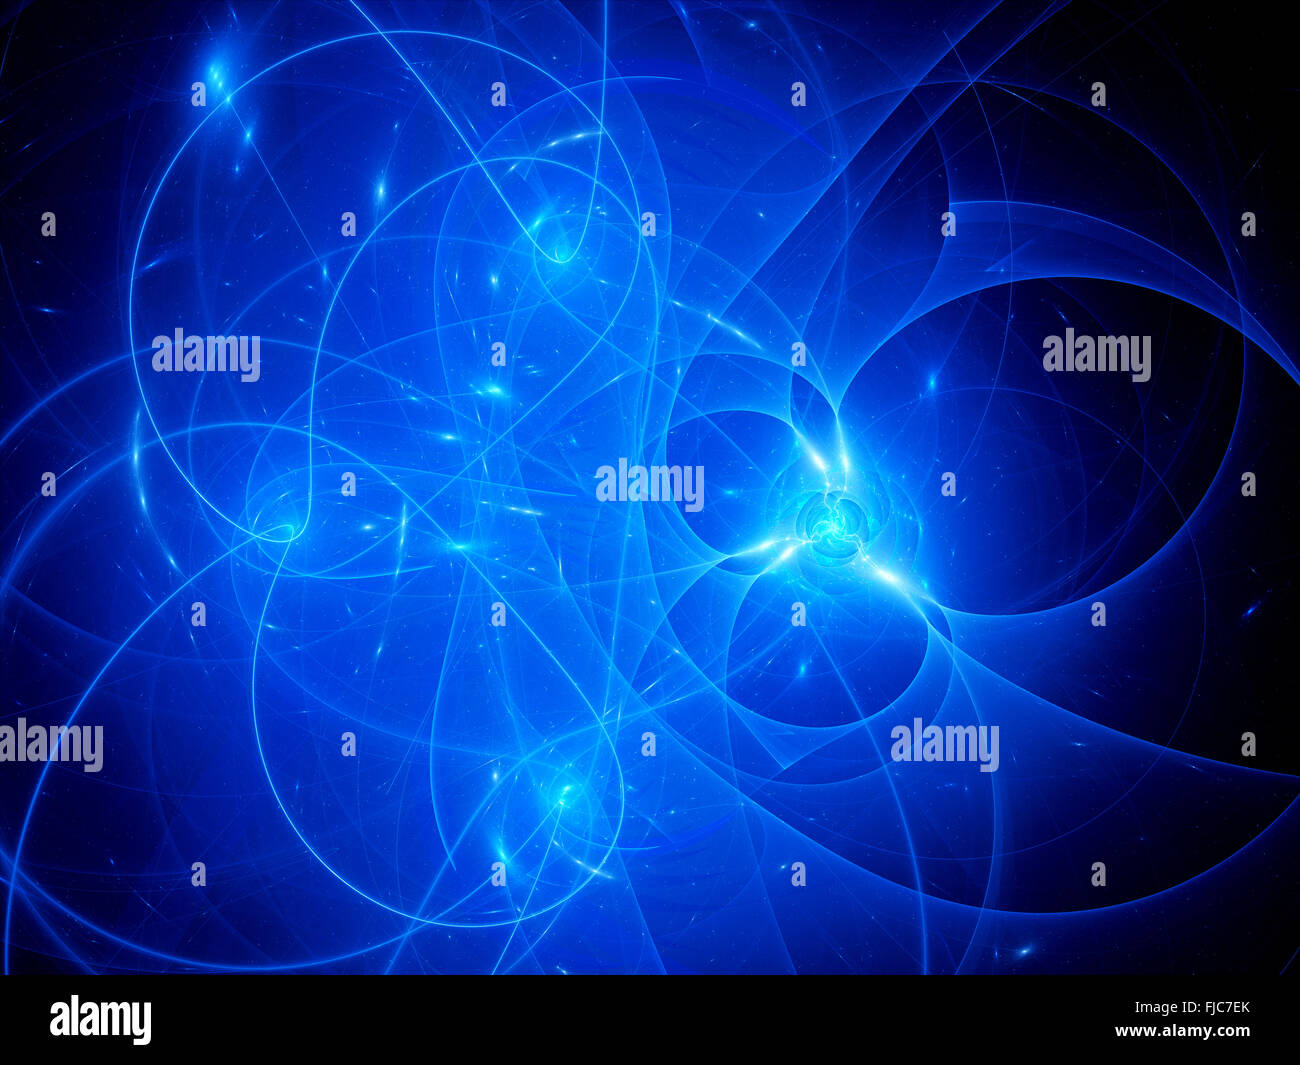 Blue glowing connections between galaxies, computer generated abstract background Stock Photo